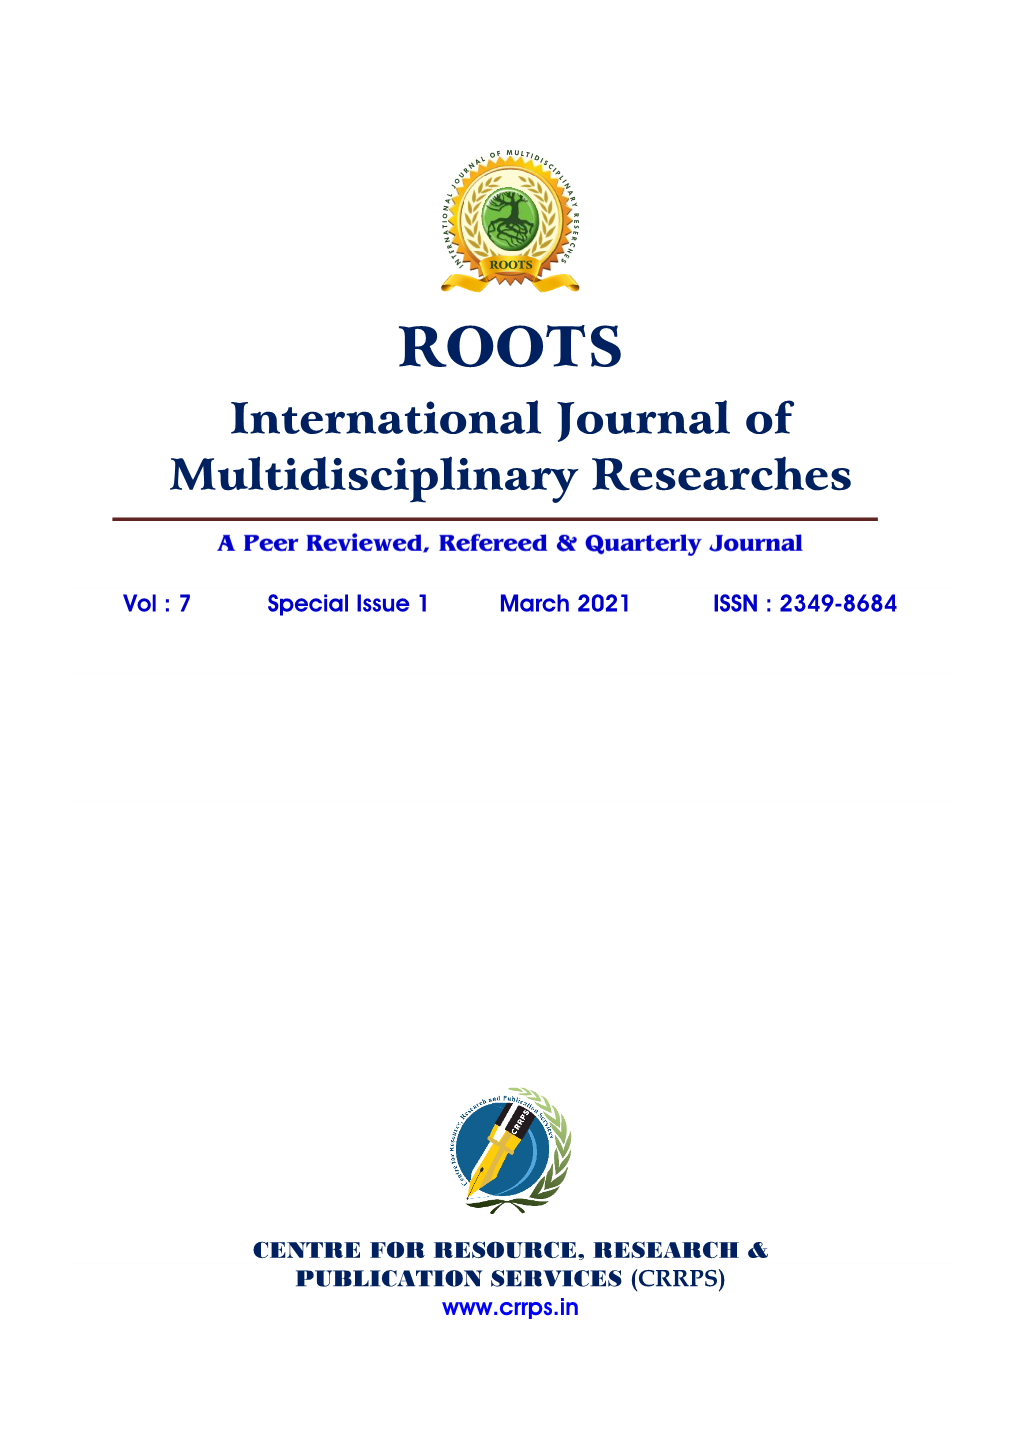 ROOTS International Journal of Multidisciplinary Researches